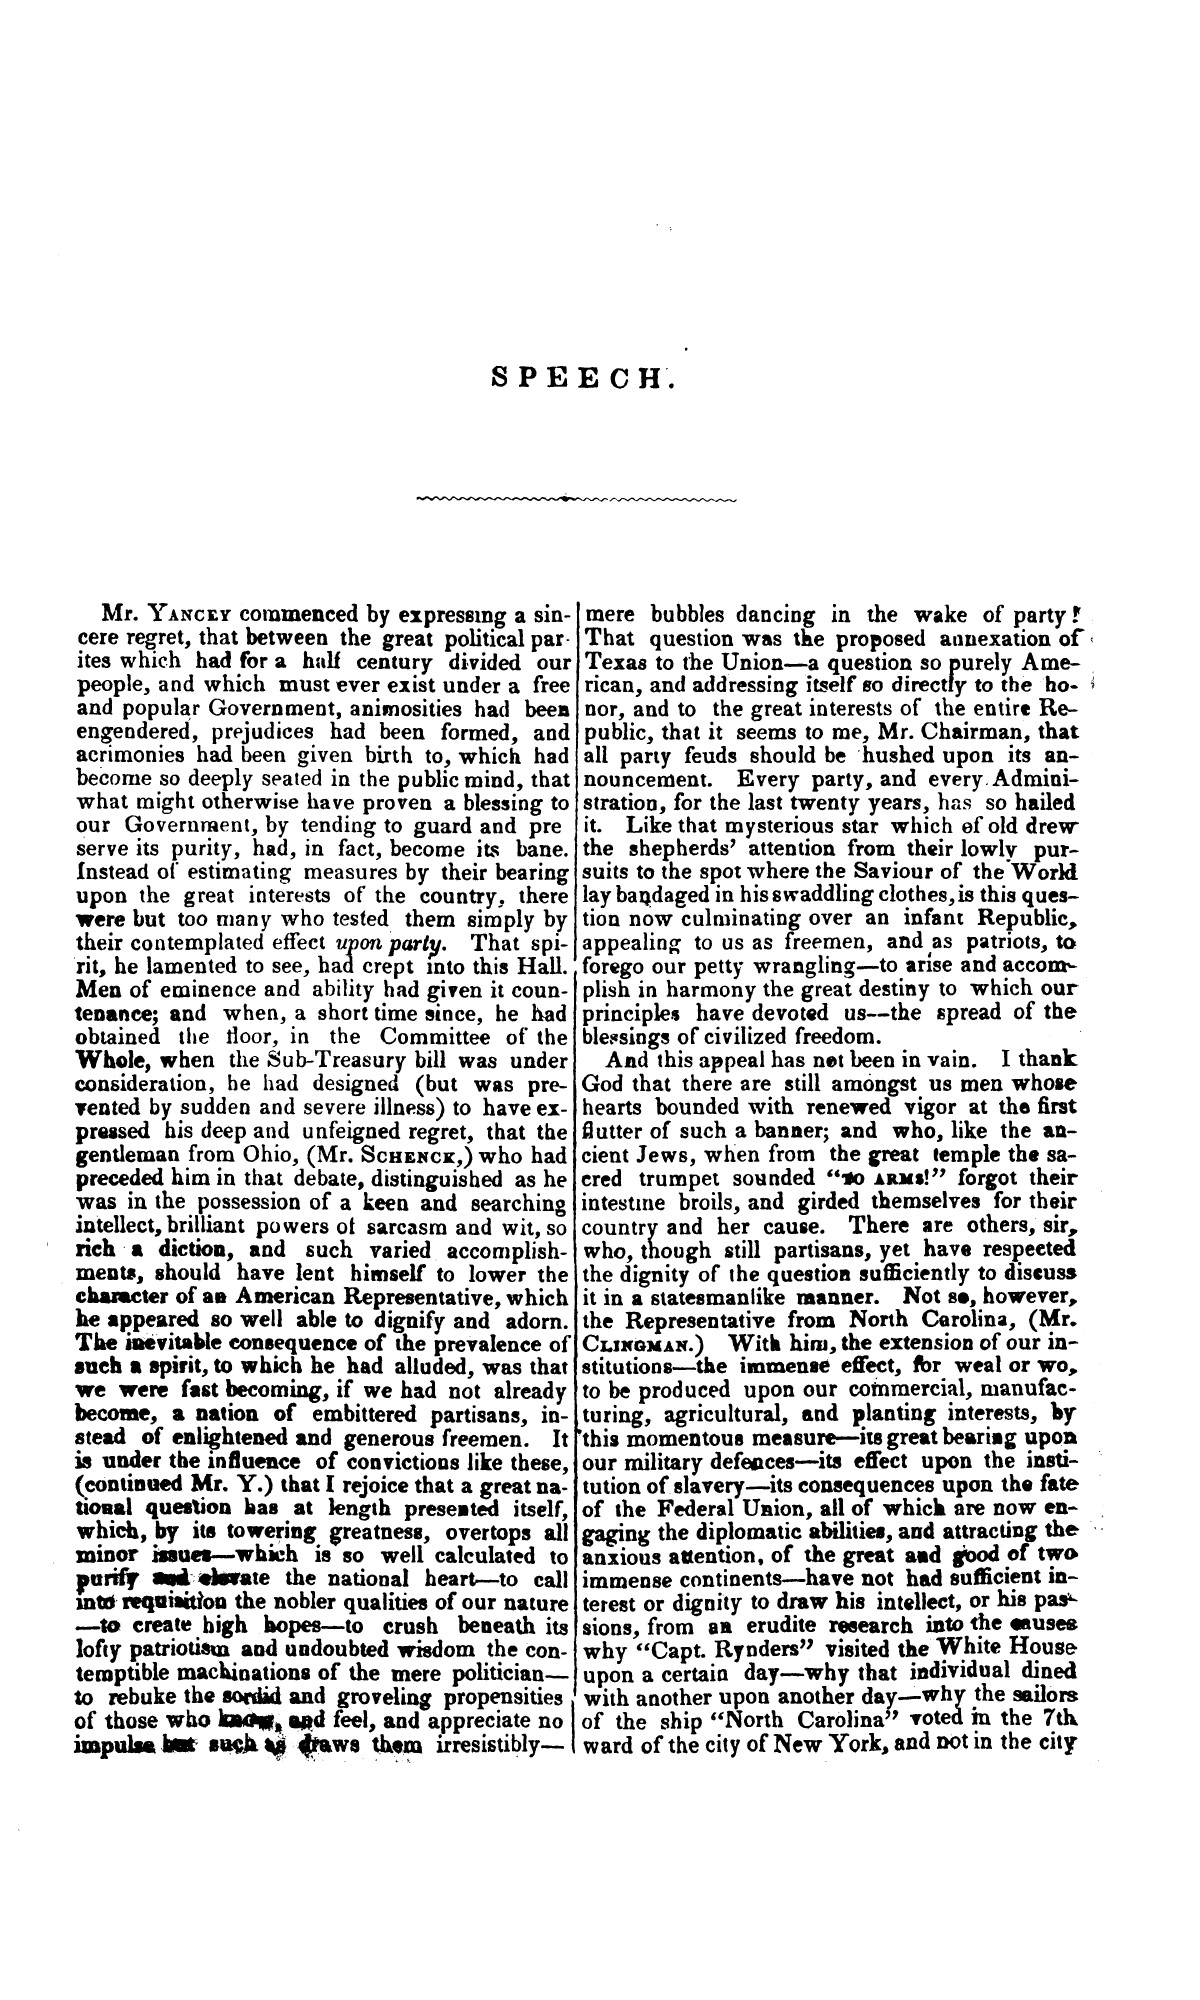 Speech of Hon. Wm. Lowndes Yancey, of Alabama, on the annexation of Texas to the United States, delivered in the House of Representatives, Jan. 7, 1845.
                                                
                                                    [Sequence #]: 3 of 14
                                                